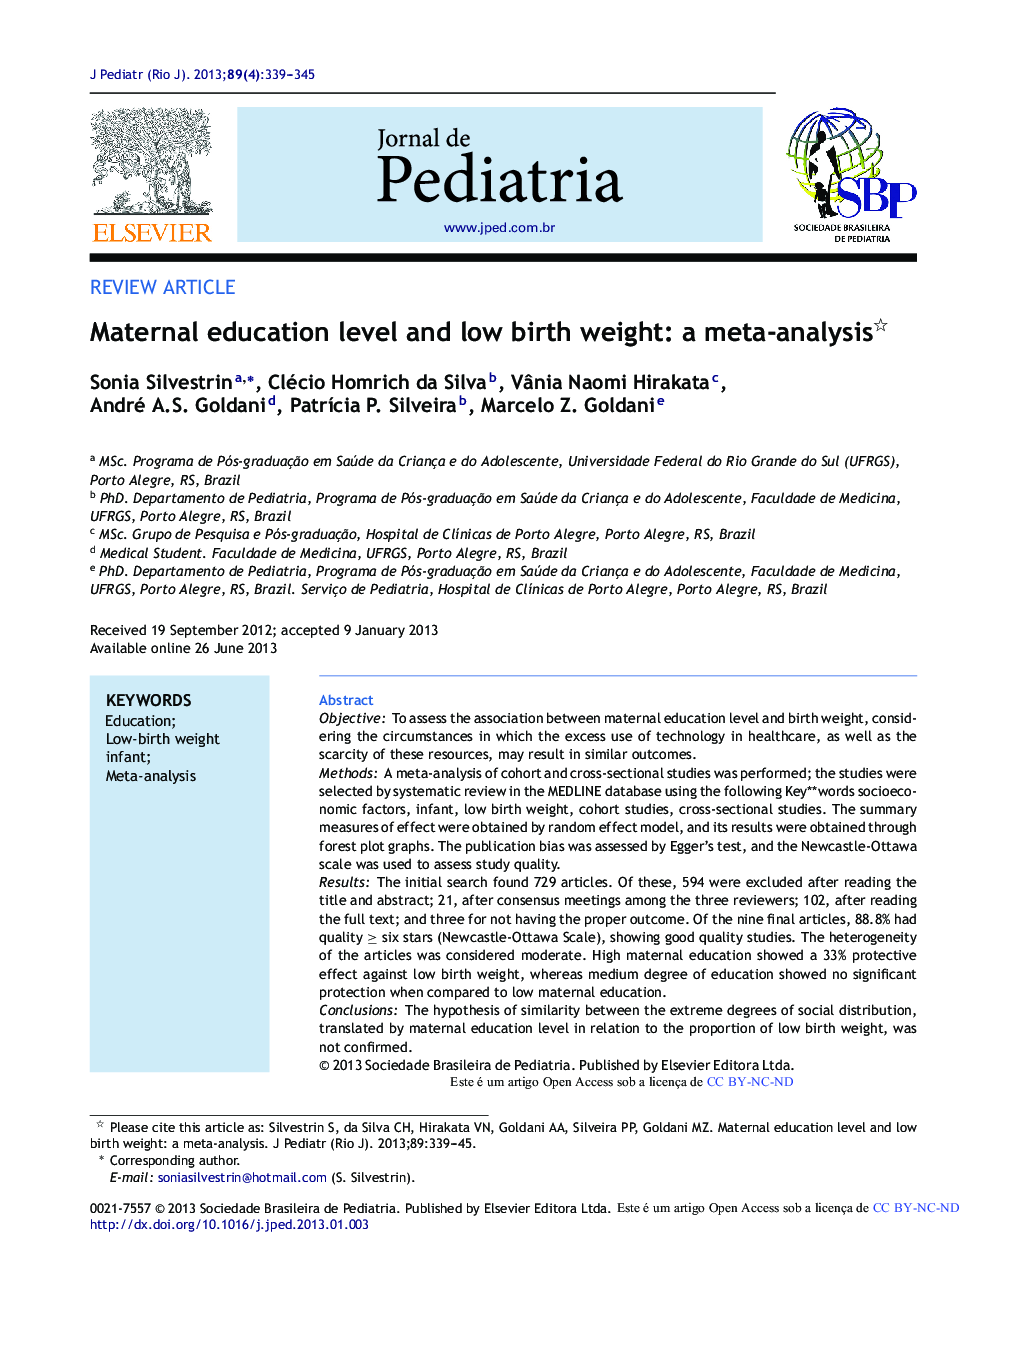 Maternal education level and low birth weight: a meta-analysis 